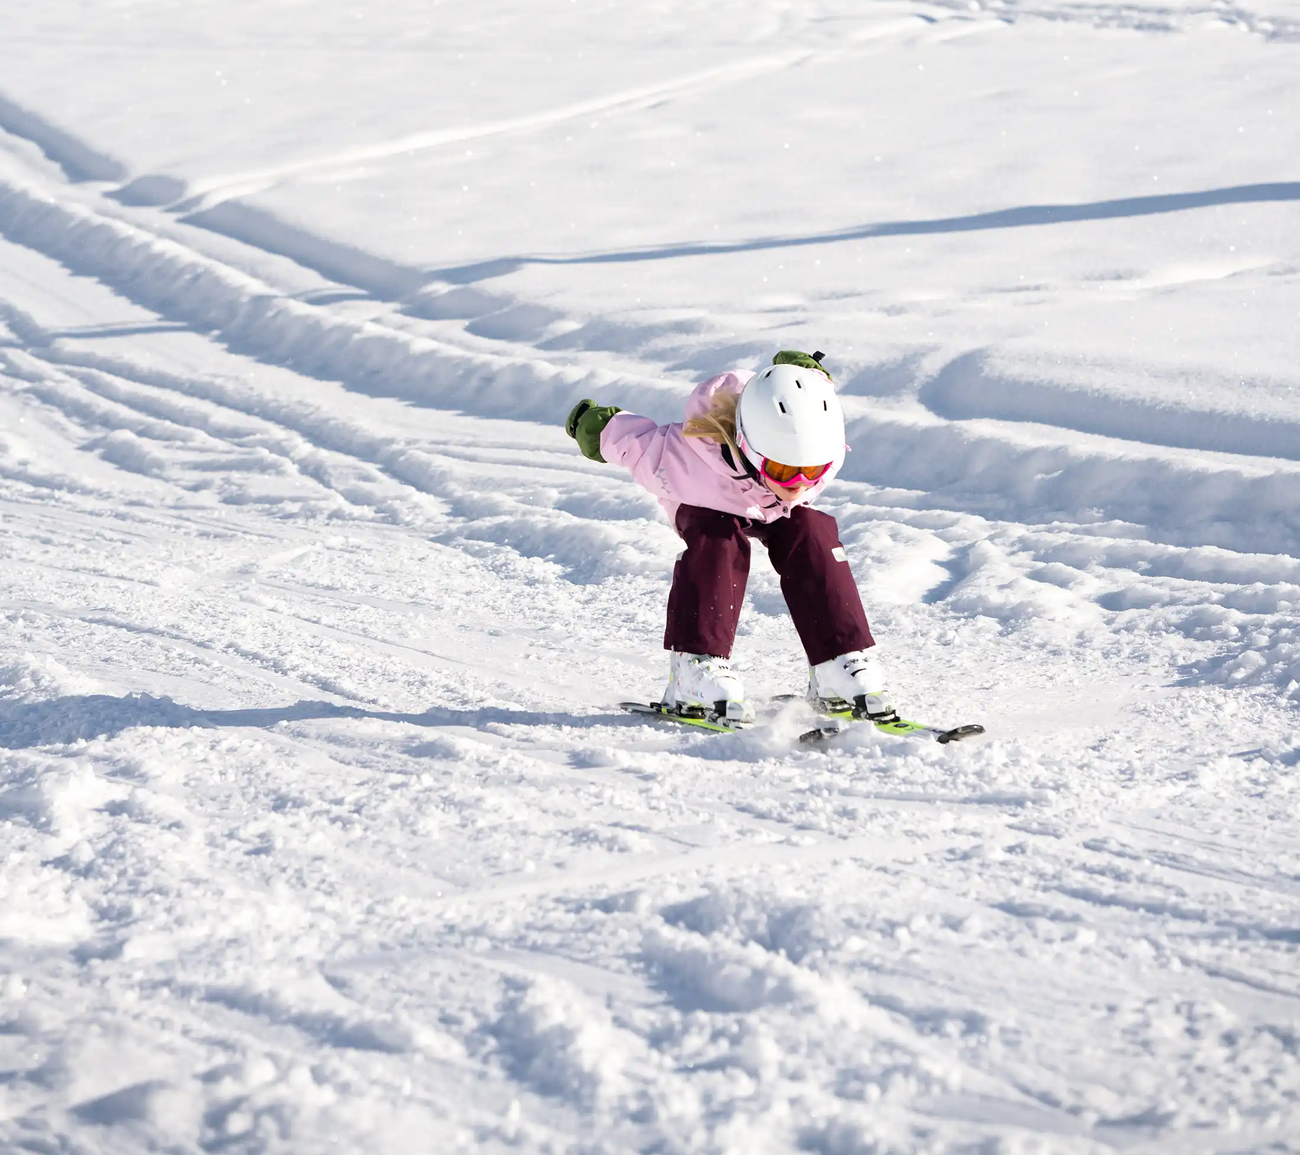 A child is zooming down the slope in a downhill position